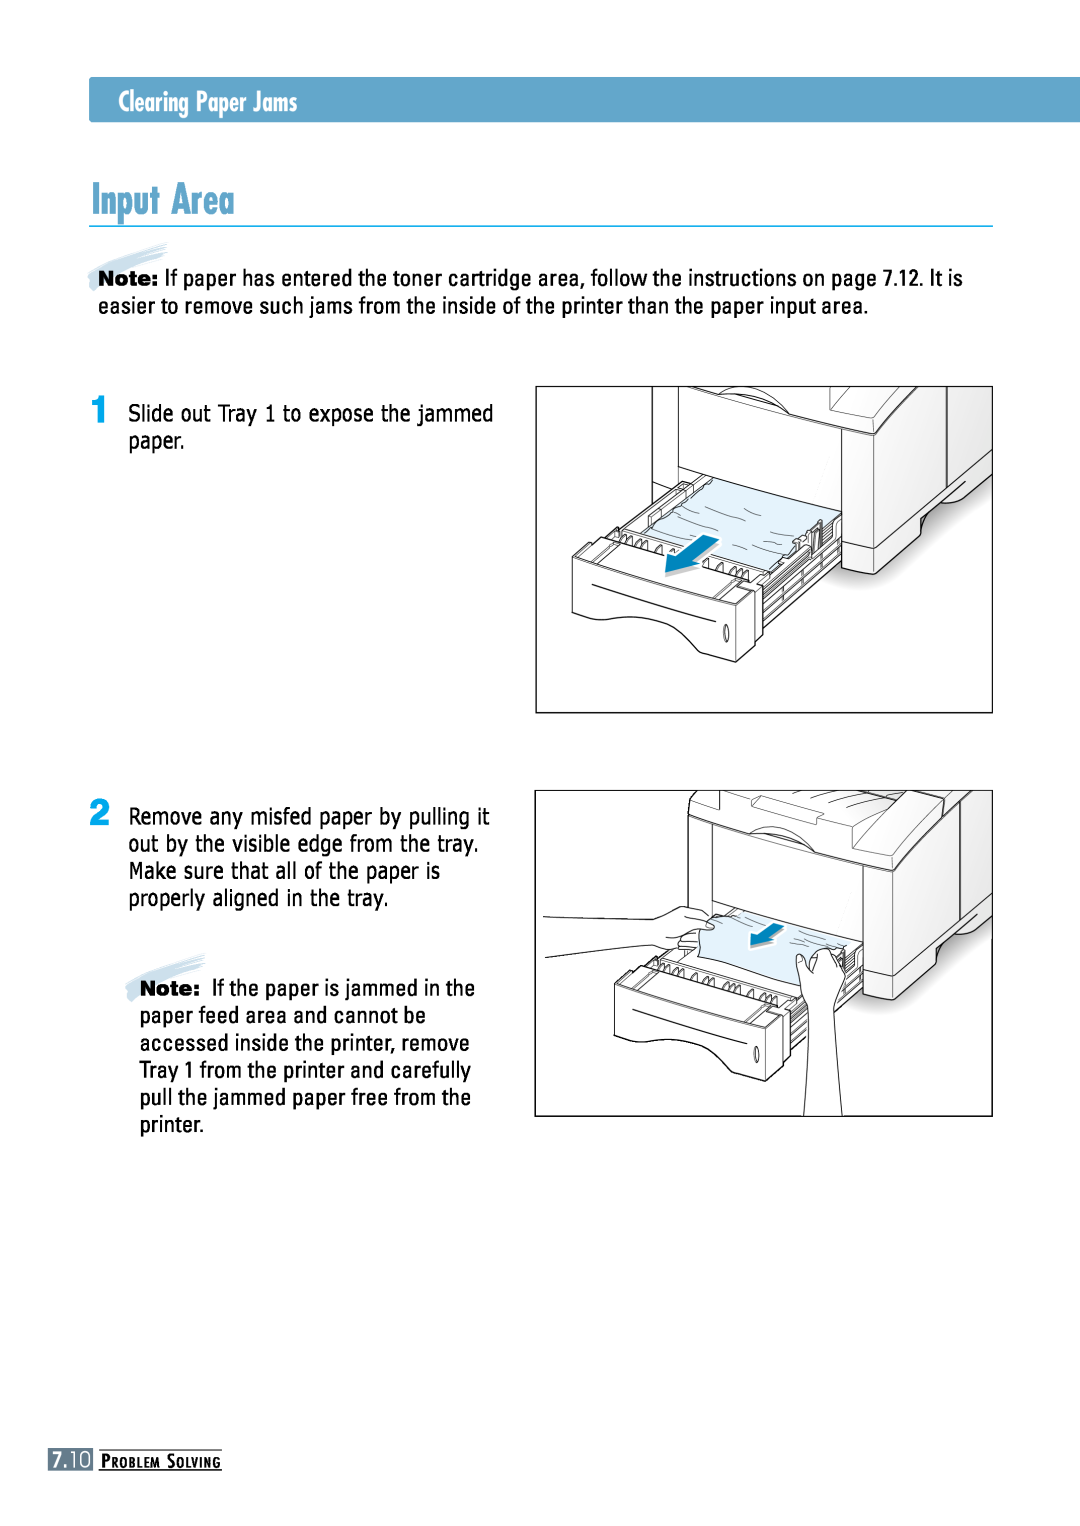 Samsung ML-6060S manual Input Area, Clearing Paper Jams, Slide out Tray 1 to expose the jammed paper, Problem Solving 